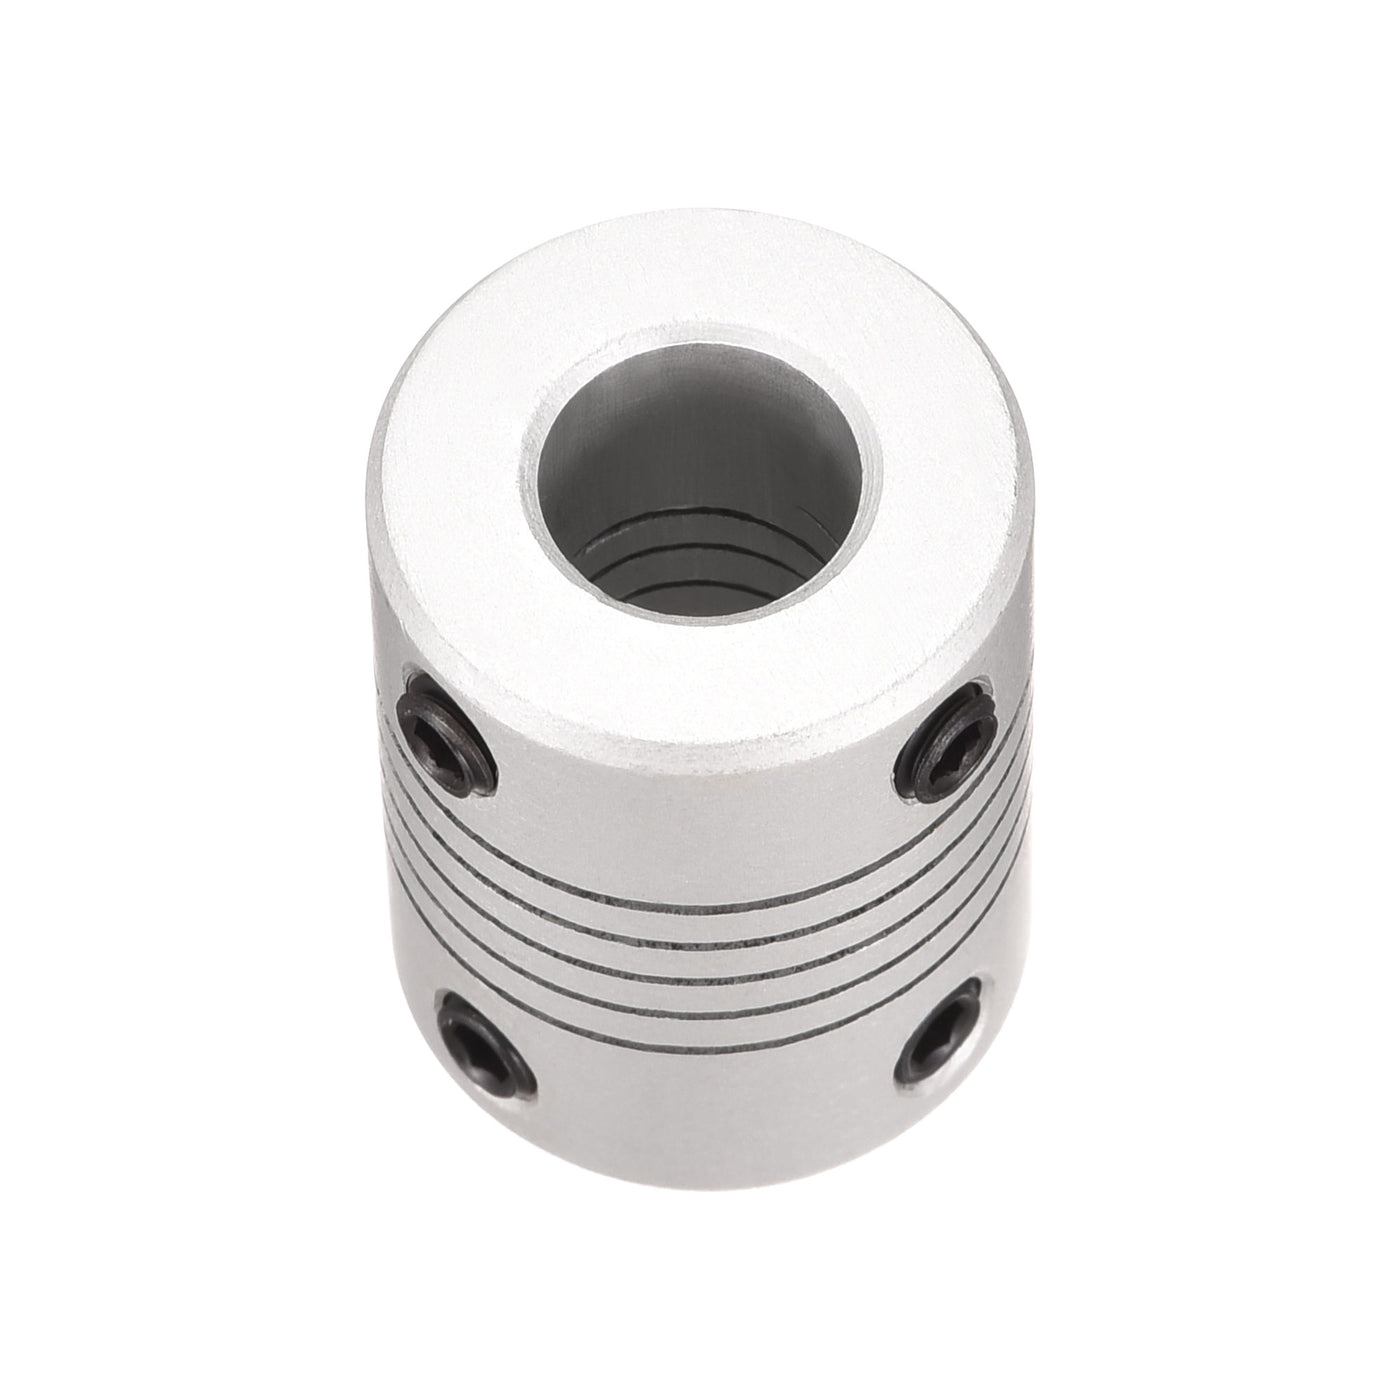 uxcell Uxcell 6.35mm to 6.35mm Aluminum Alloy Shaft Coupling Flexible Coupler L25xD19 5pcs